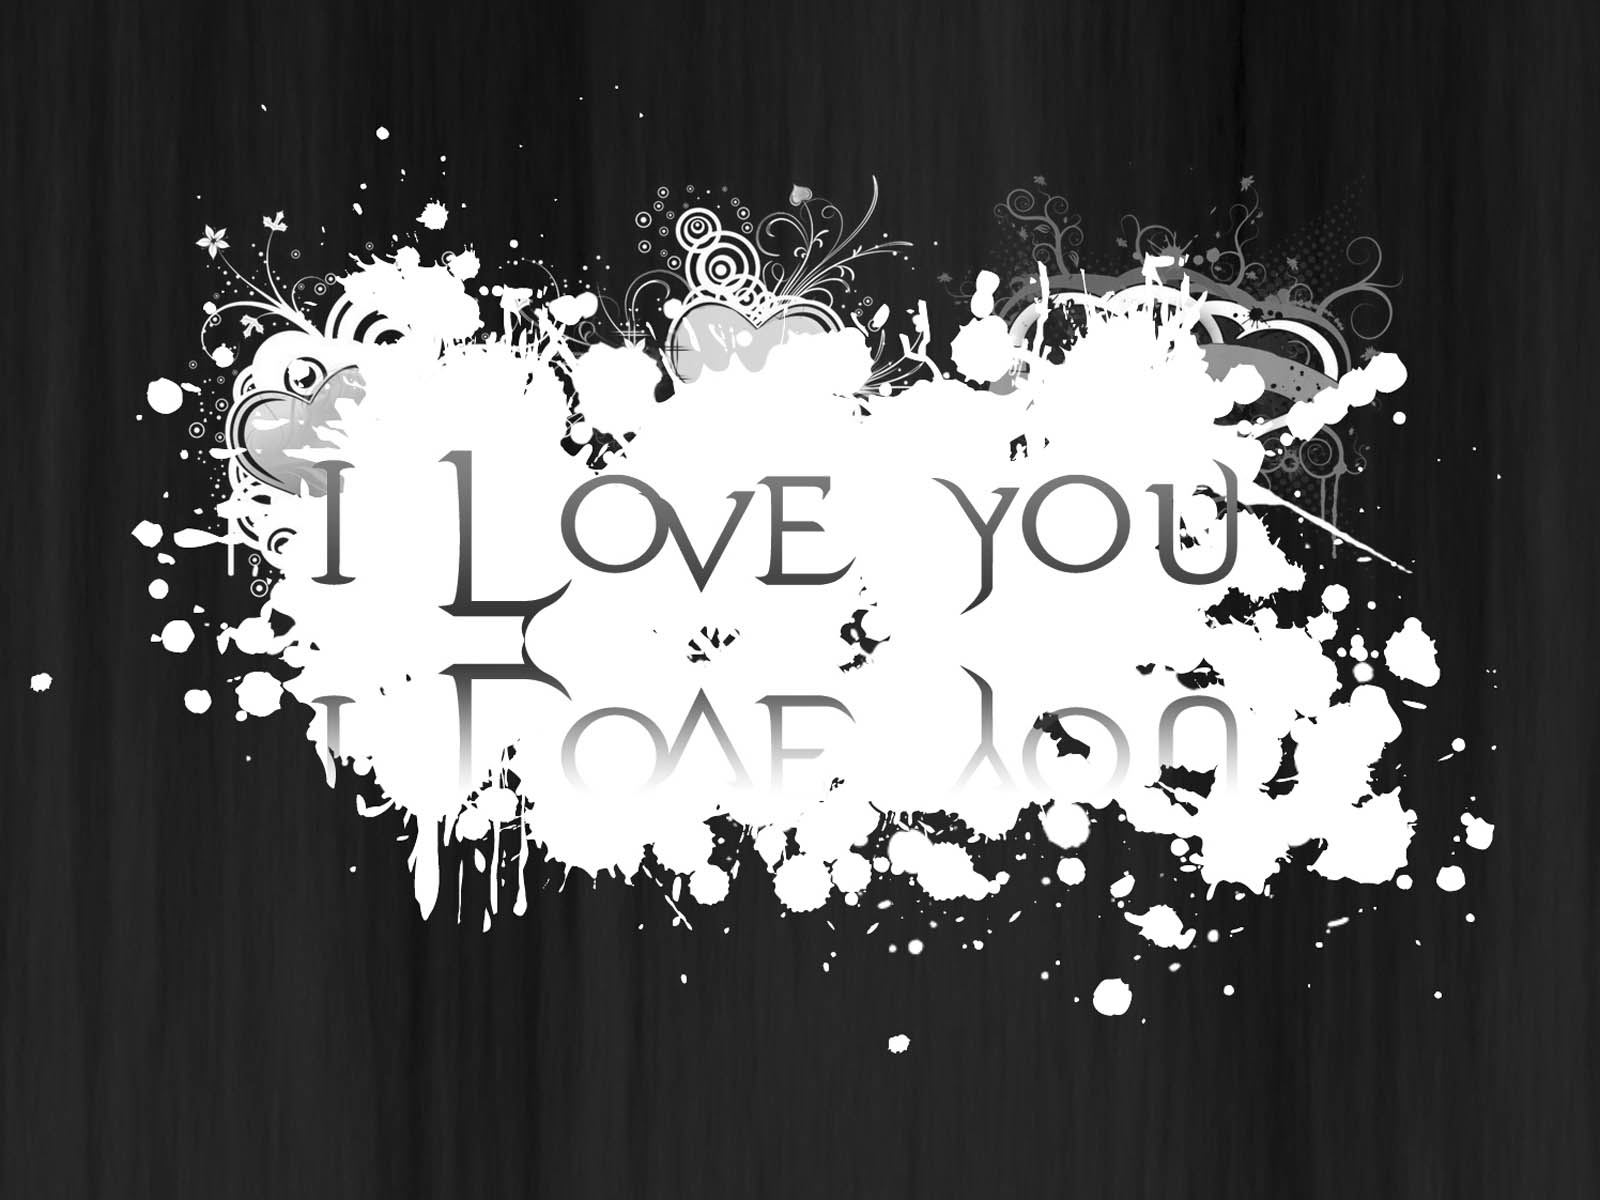 Are Watching The Black And White Love Wallpaper